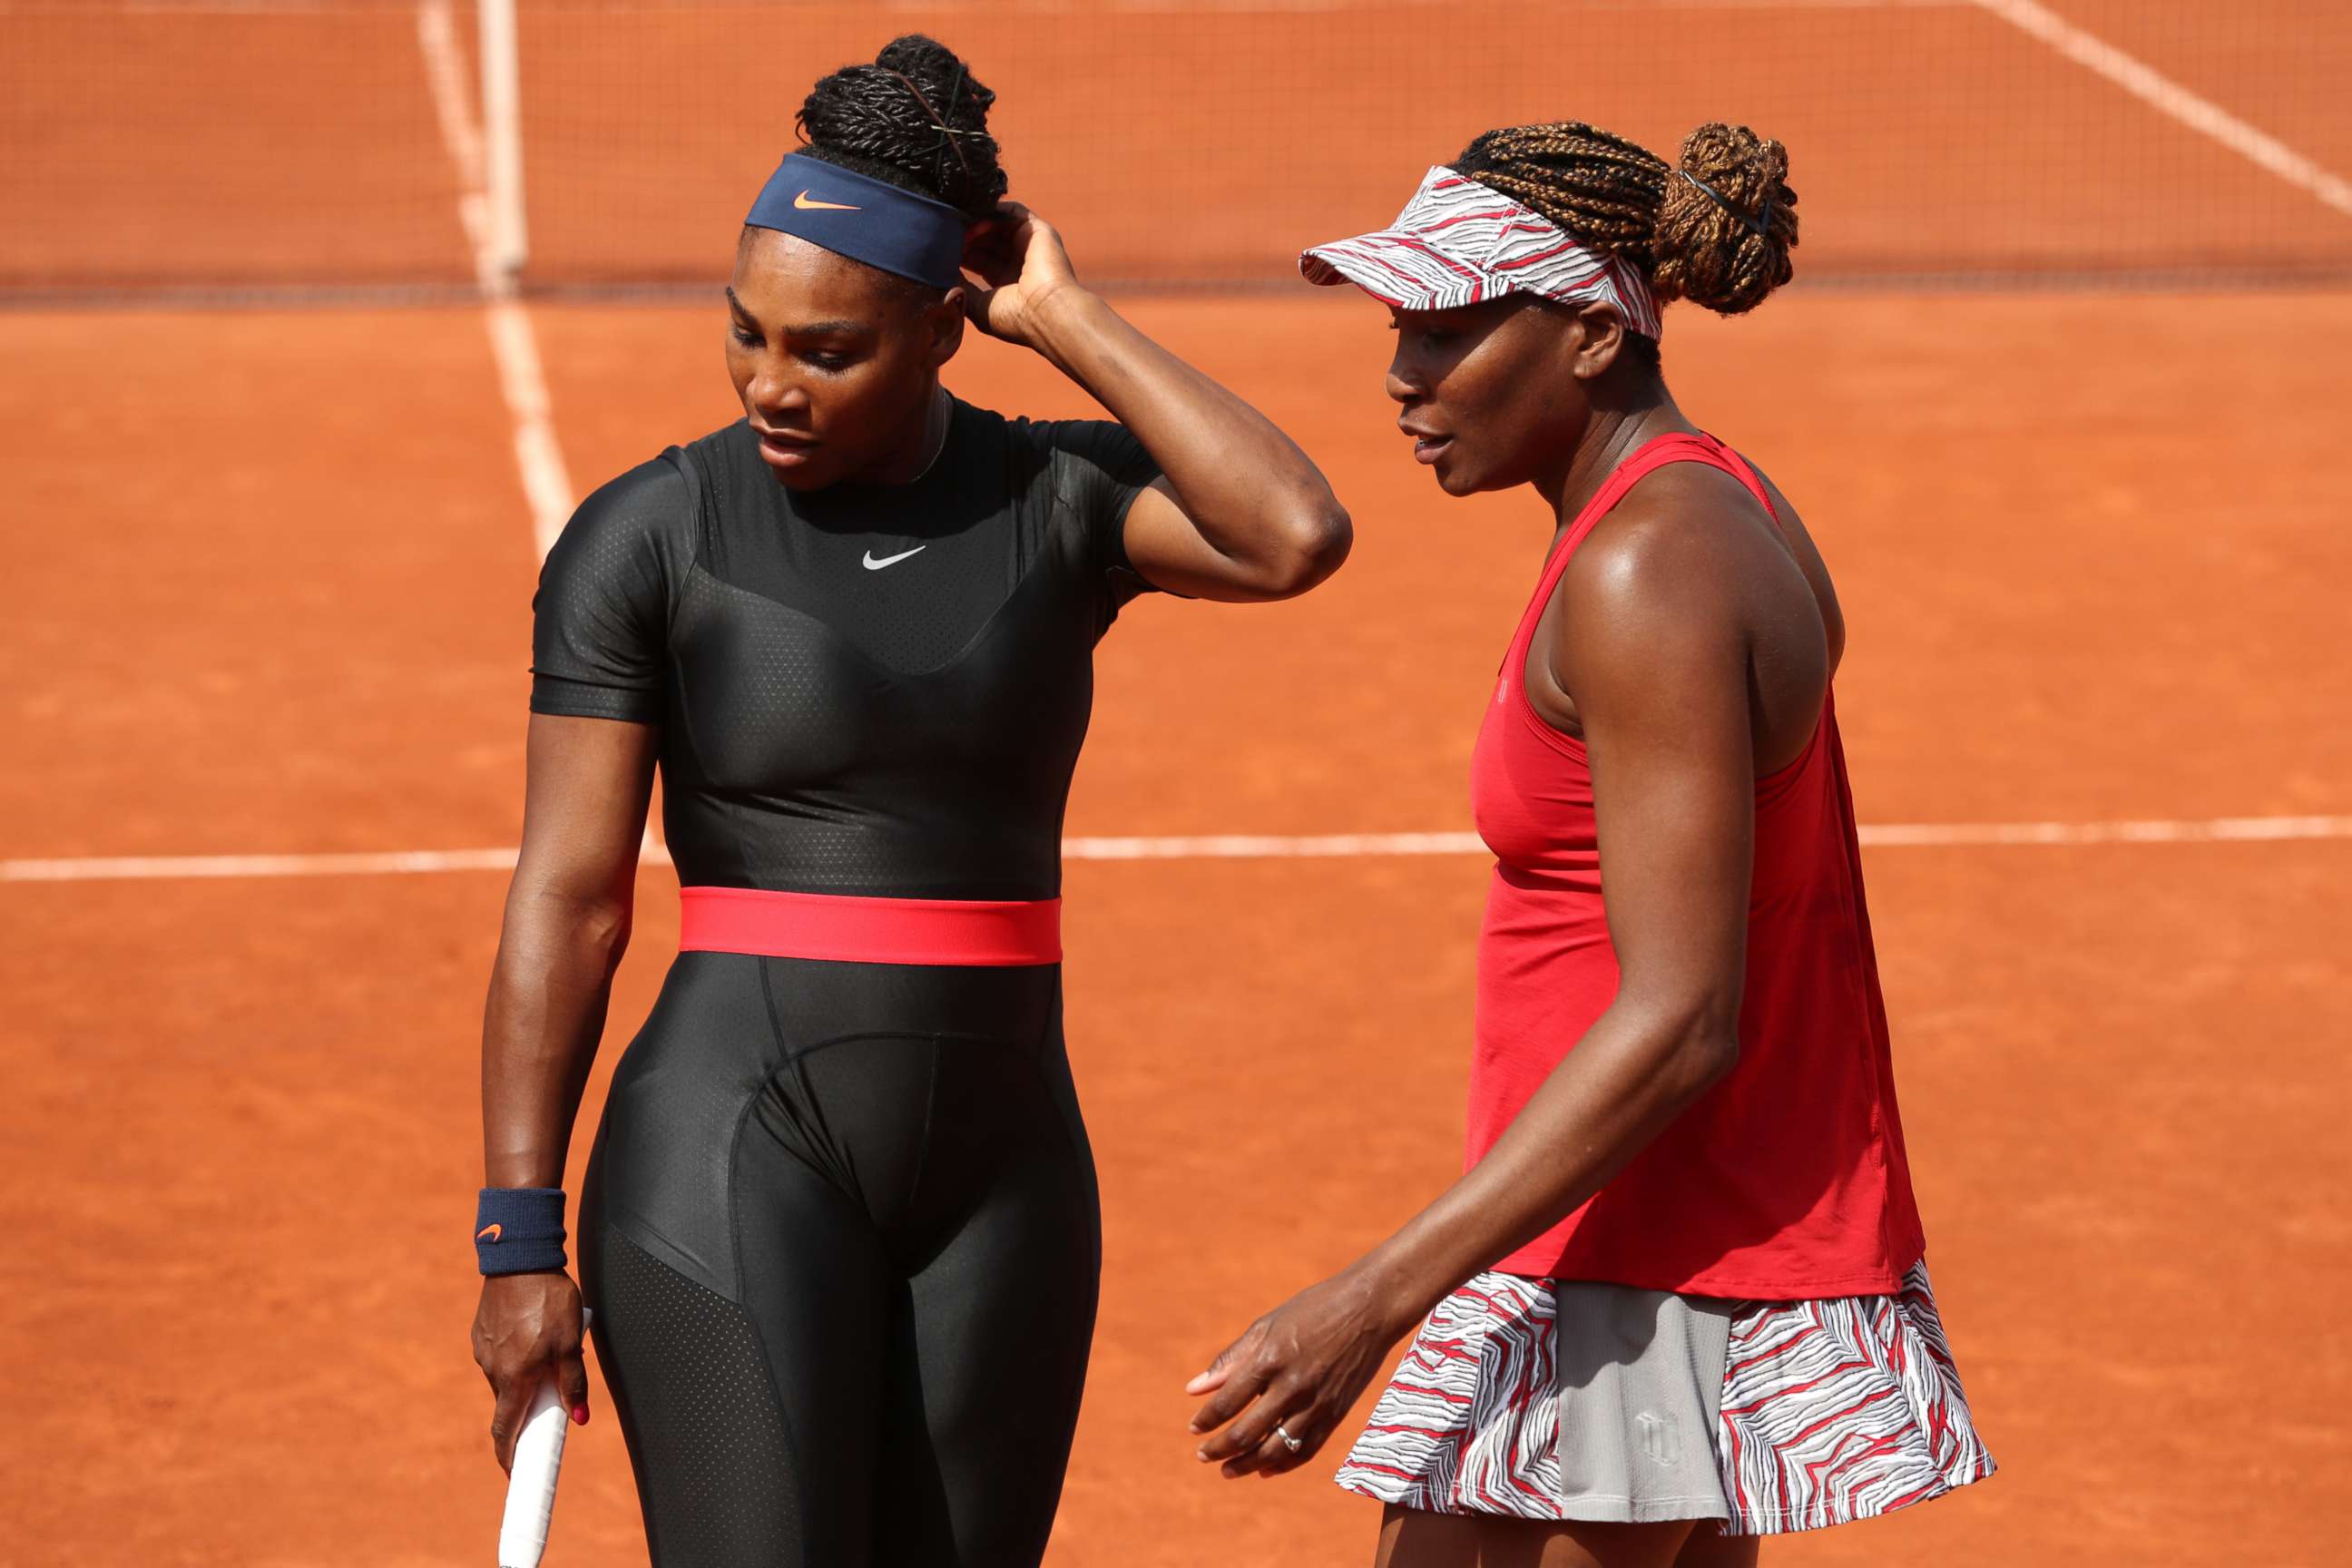 PHOTO: Serena Williams and Venus Williams talk during their ladies doubles match at the 2018 French Open, June 3, 2018 in Paris.